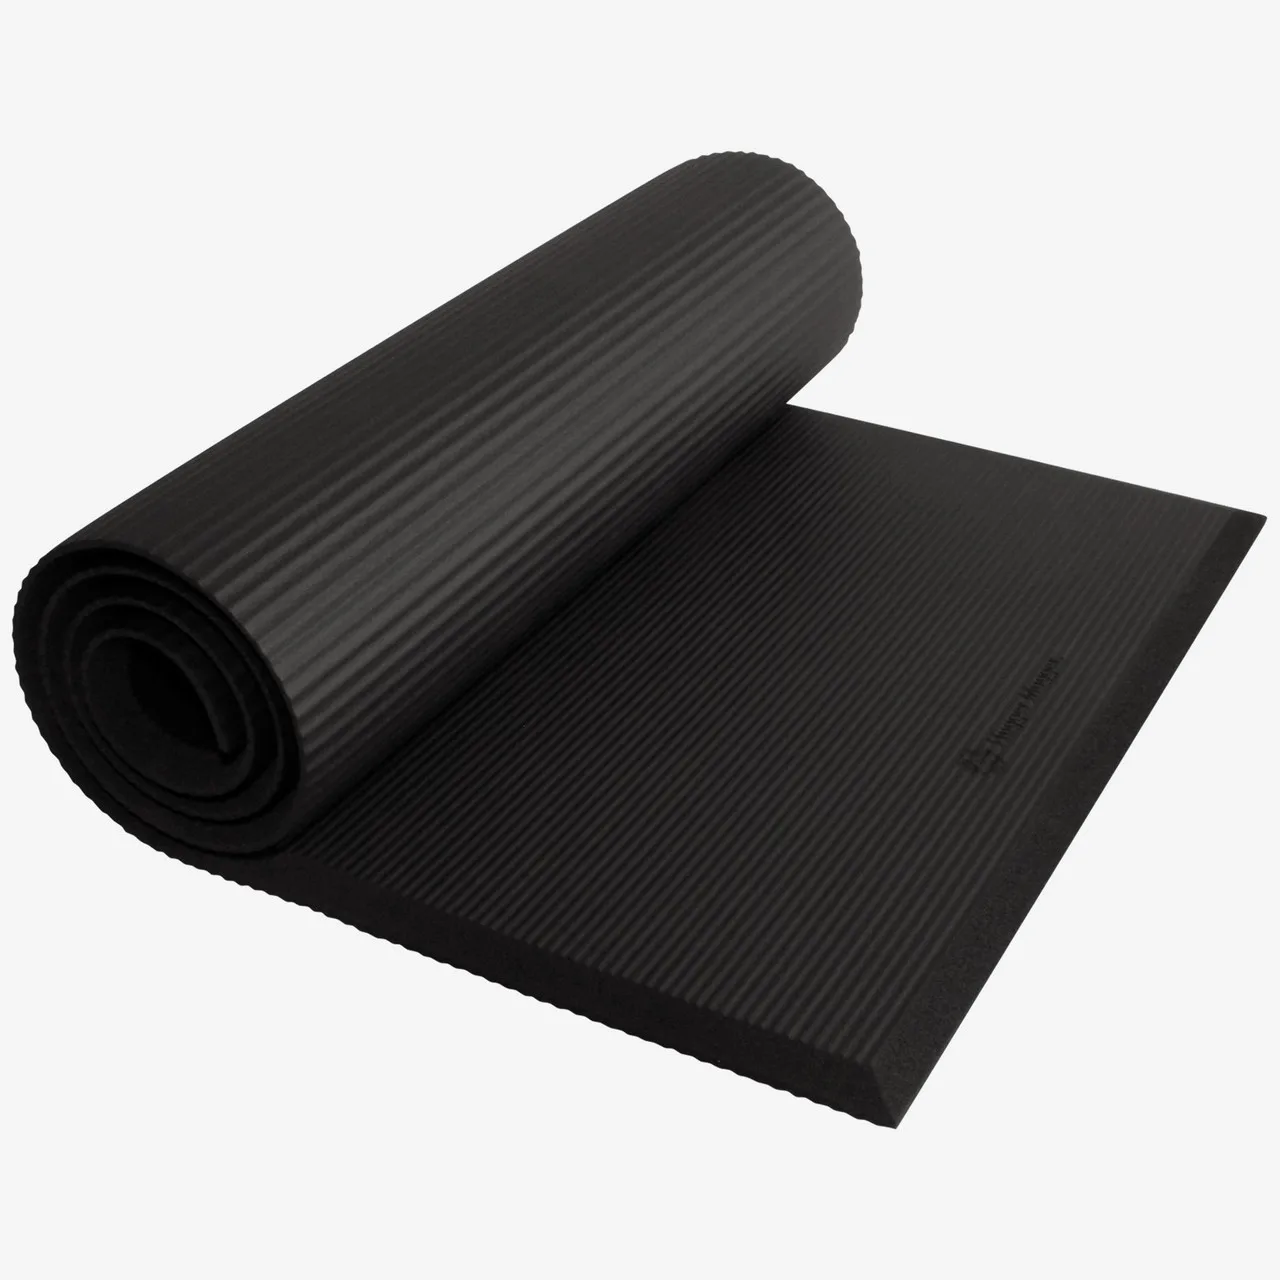 Wholesale Yoga & Meditation Supplies Made in Canada – Love My Mat